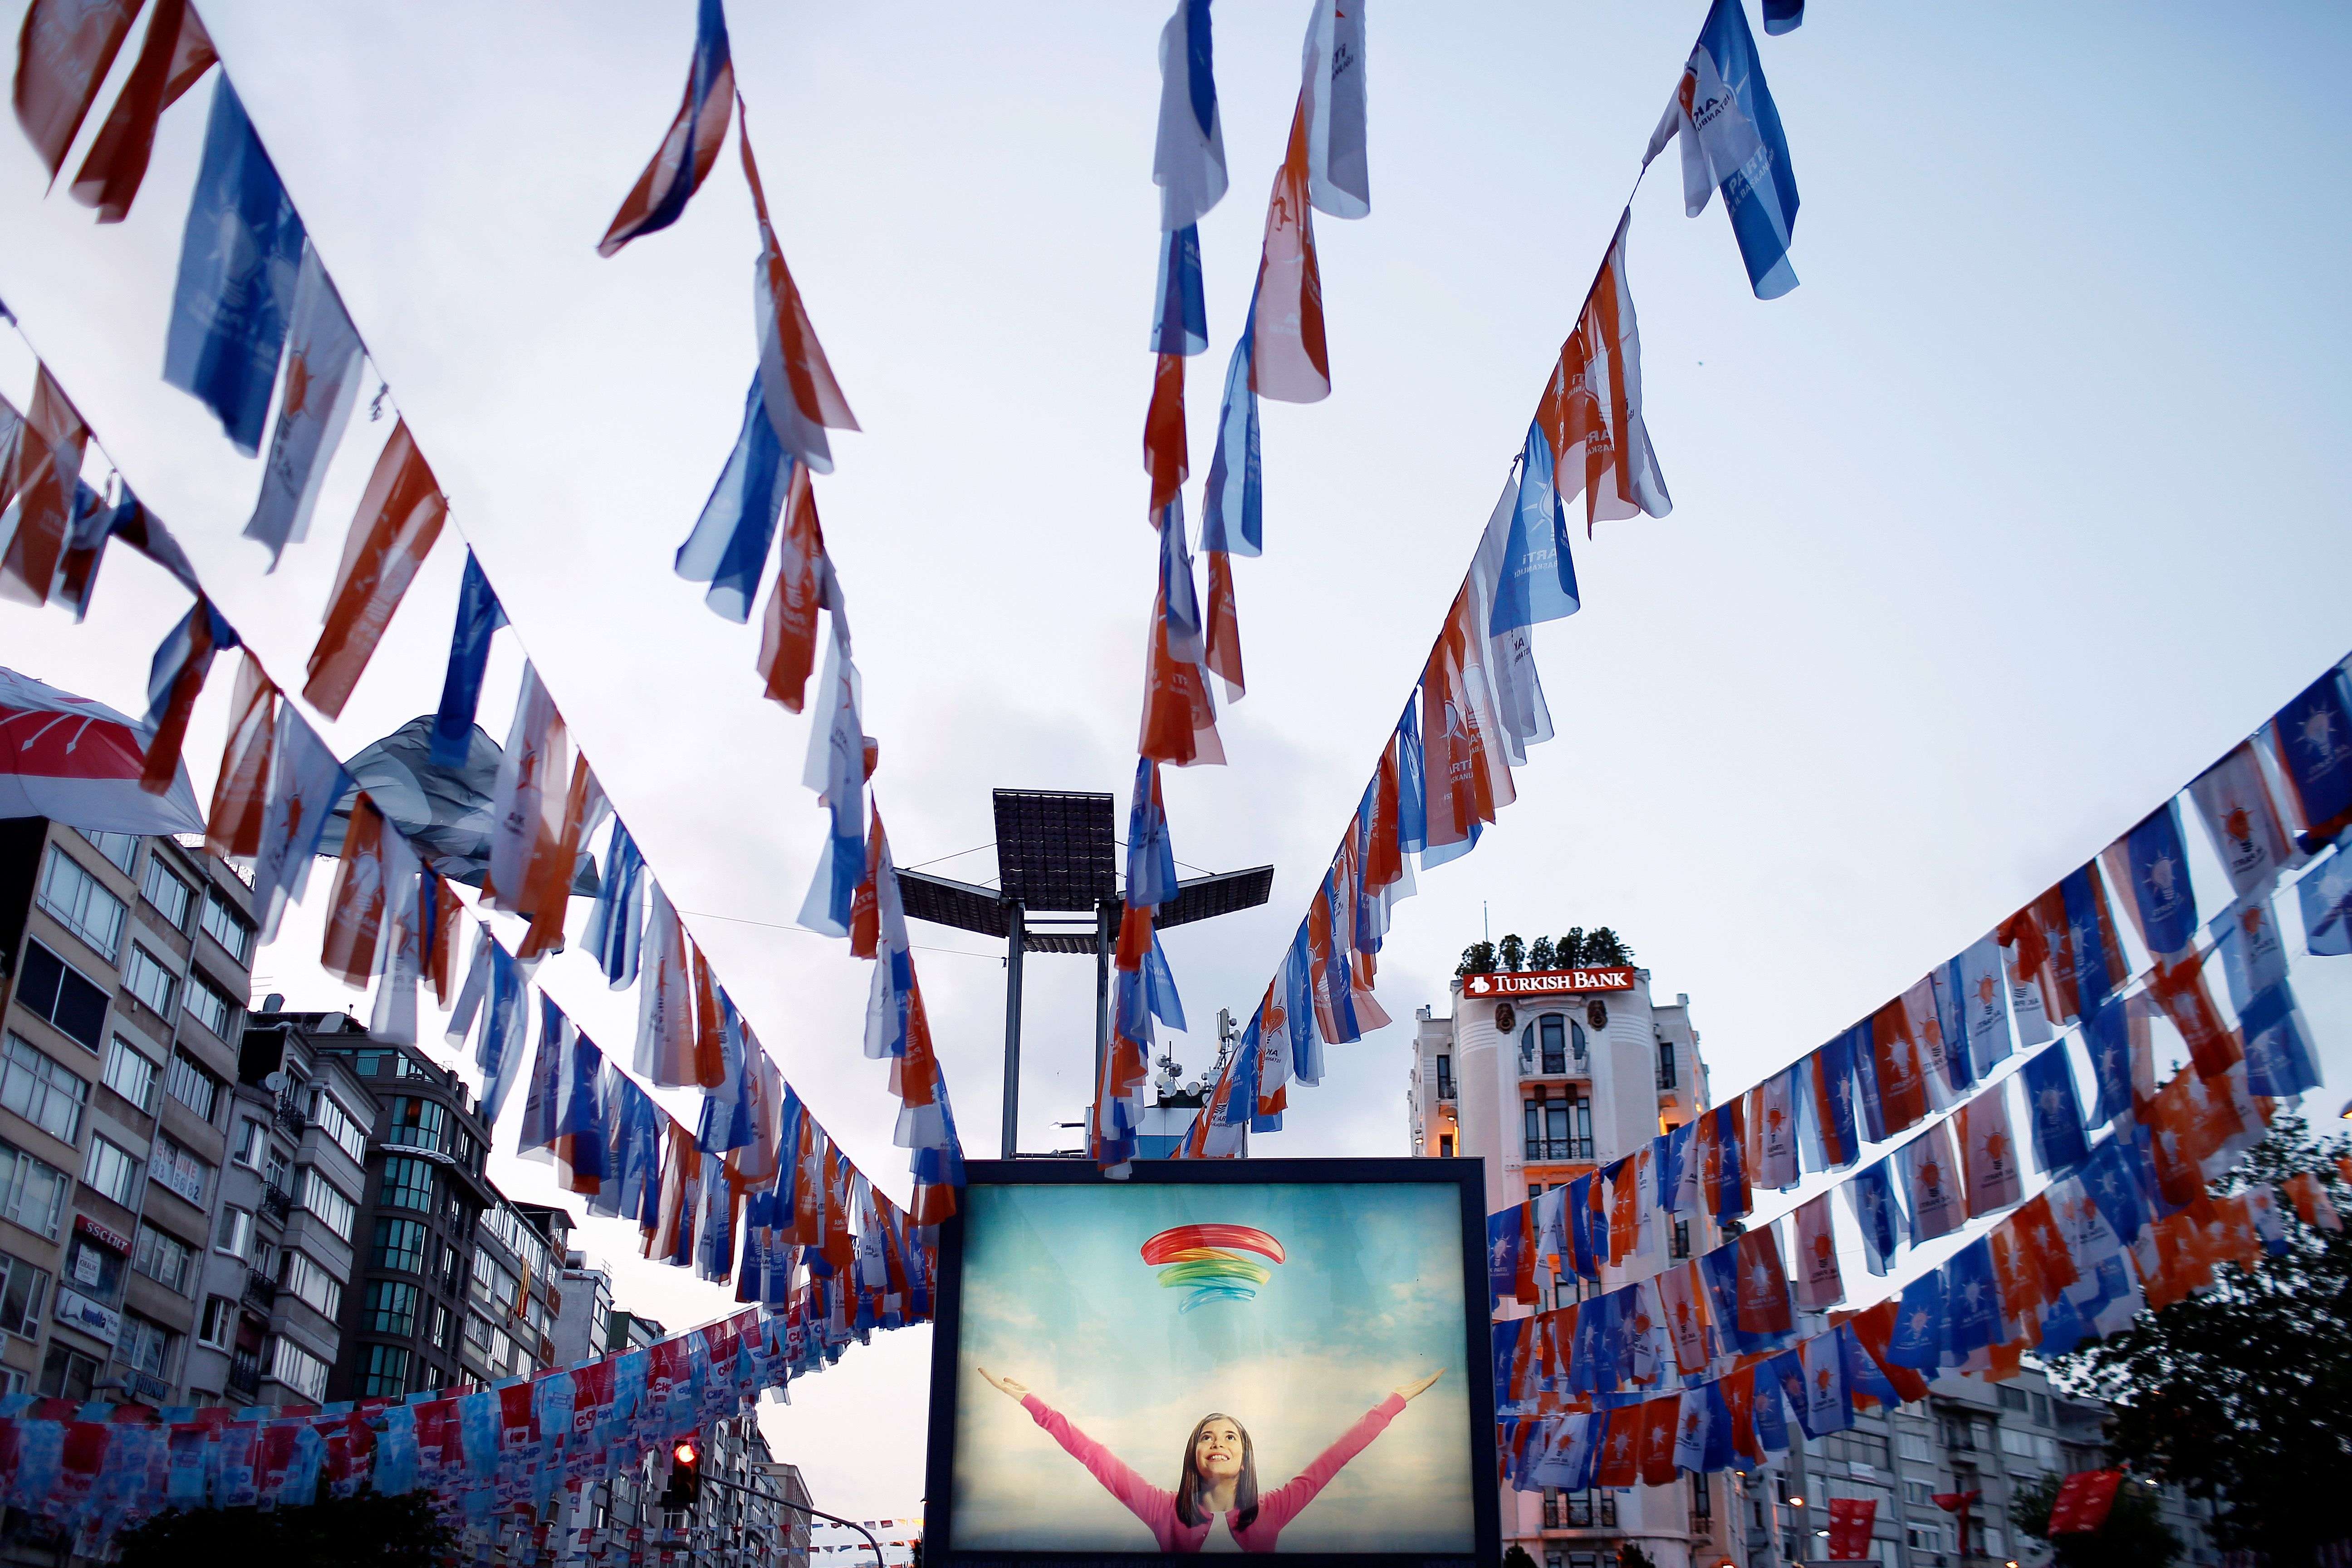 Turkey’s governing Justice and Development Party, (AKP) flags are seen over an advertising billboard in Istanbul, Turkey. (AP/Emrah Gurel) 